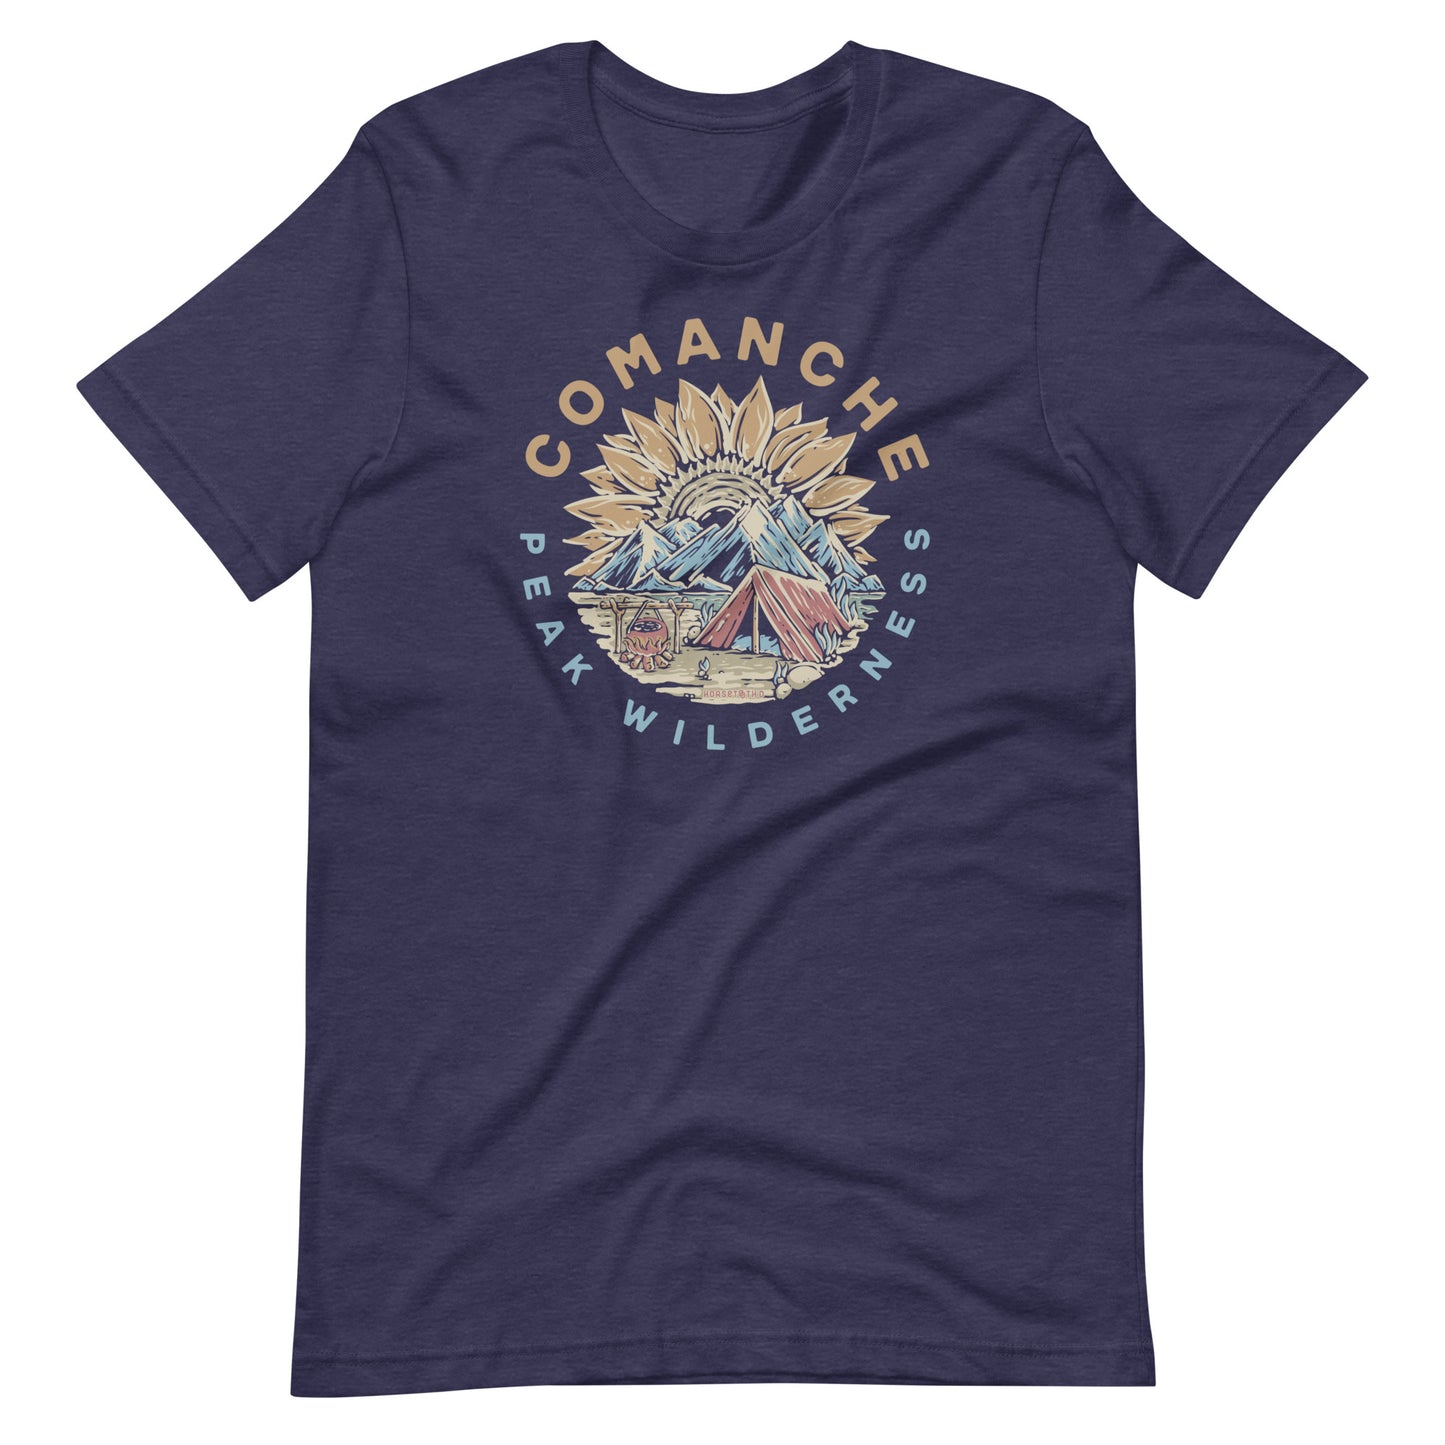 Athletic fit t-shirt by Horsetooth'd, with a unique design inspired by the Comanche Peak Wilderness area in Northern Colorado.